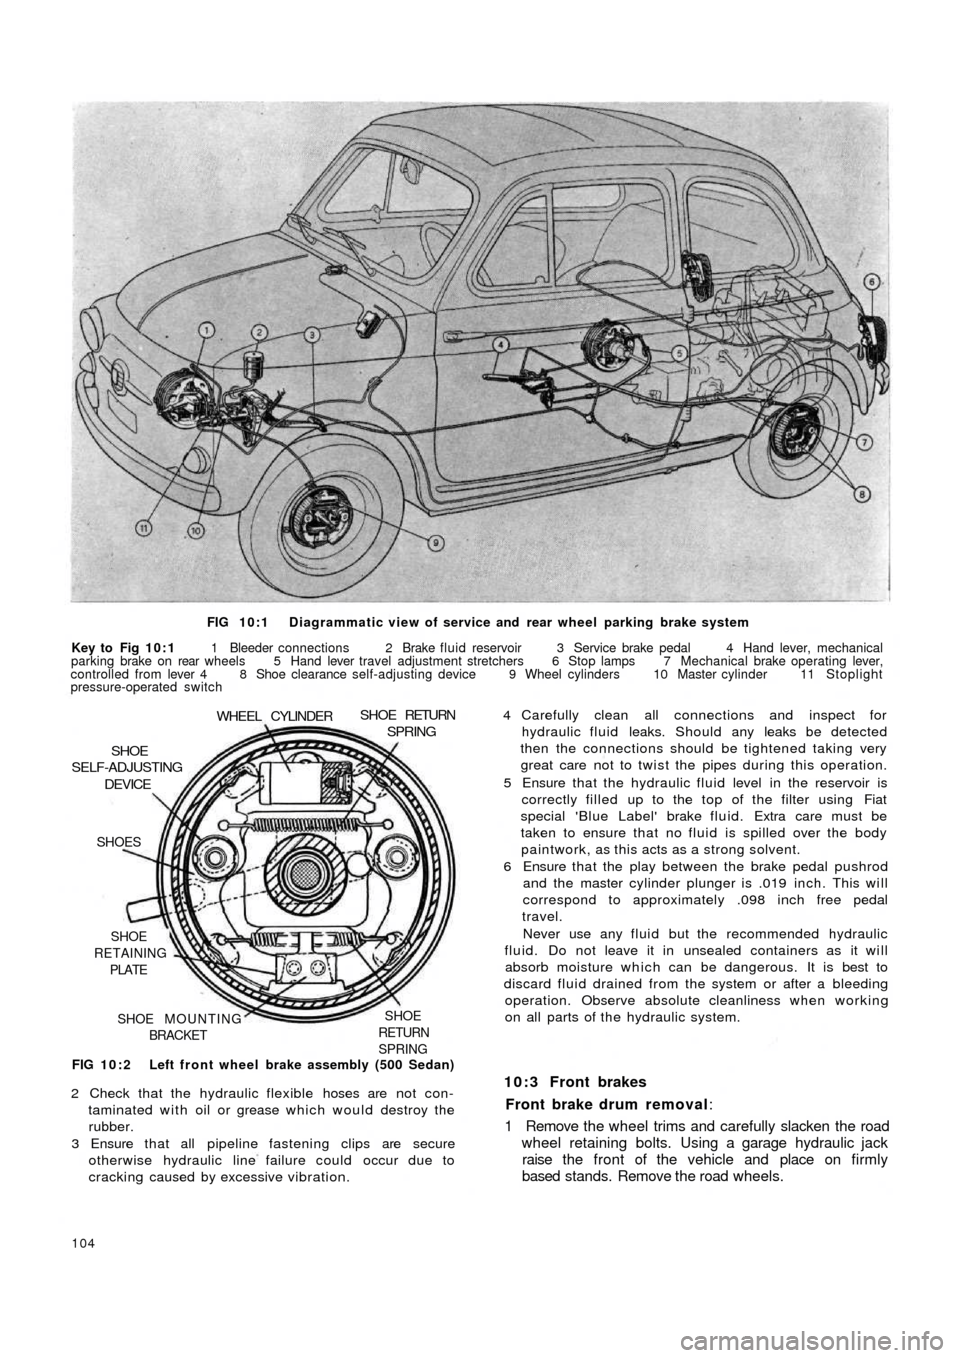 FIAT 500 1958 1.G User Guide FIG 10:1 Diagrammatic view of service and rear wheel parking brake system
Key to  Fig  10:1 1 Bleeder connections 2 Brake fluid reservoir 3 Service brake pedal 4 Hand lever, mechanical
parking brake o